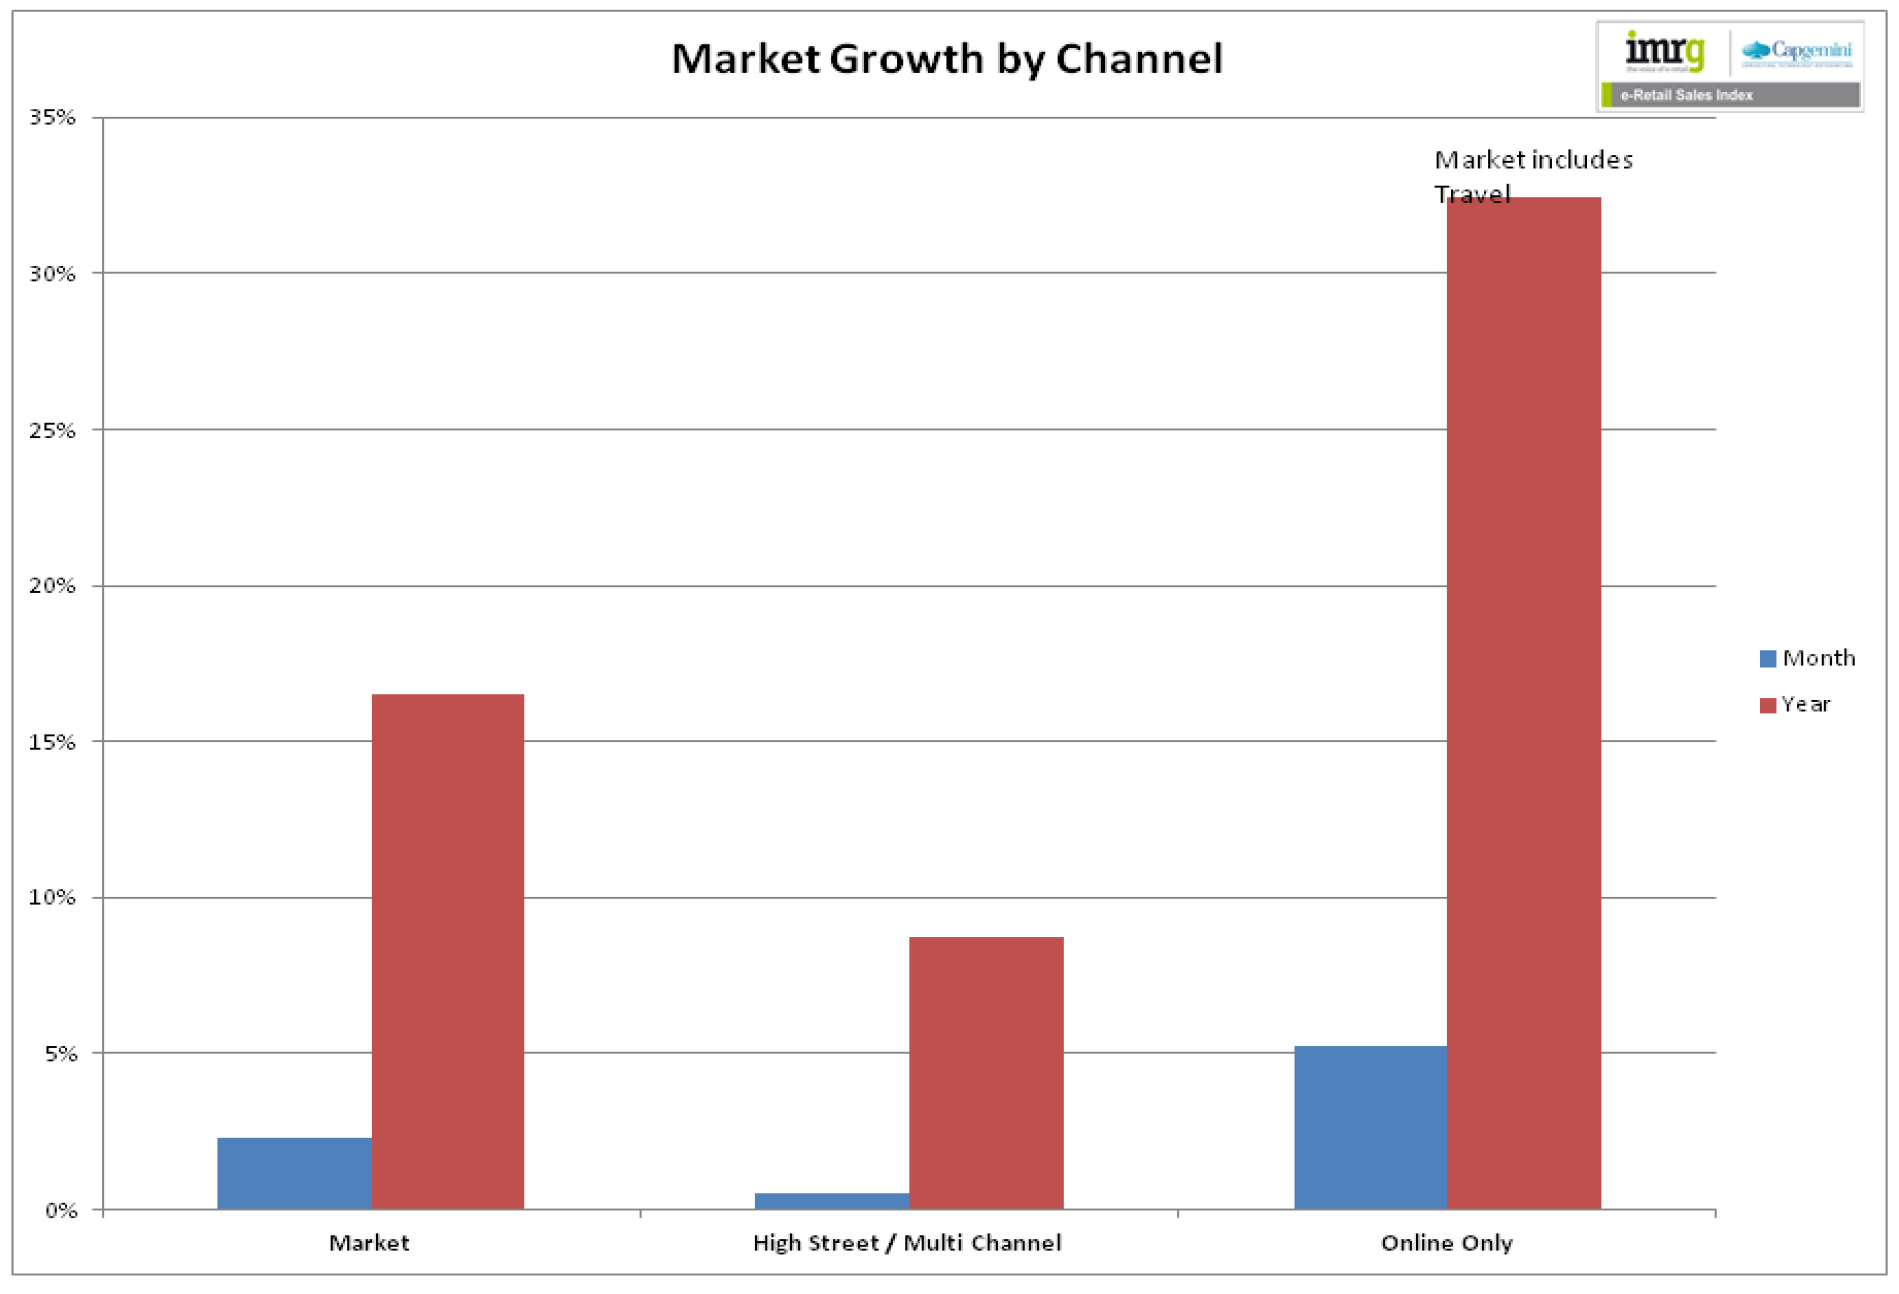 Market growth by channel